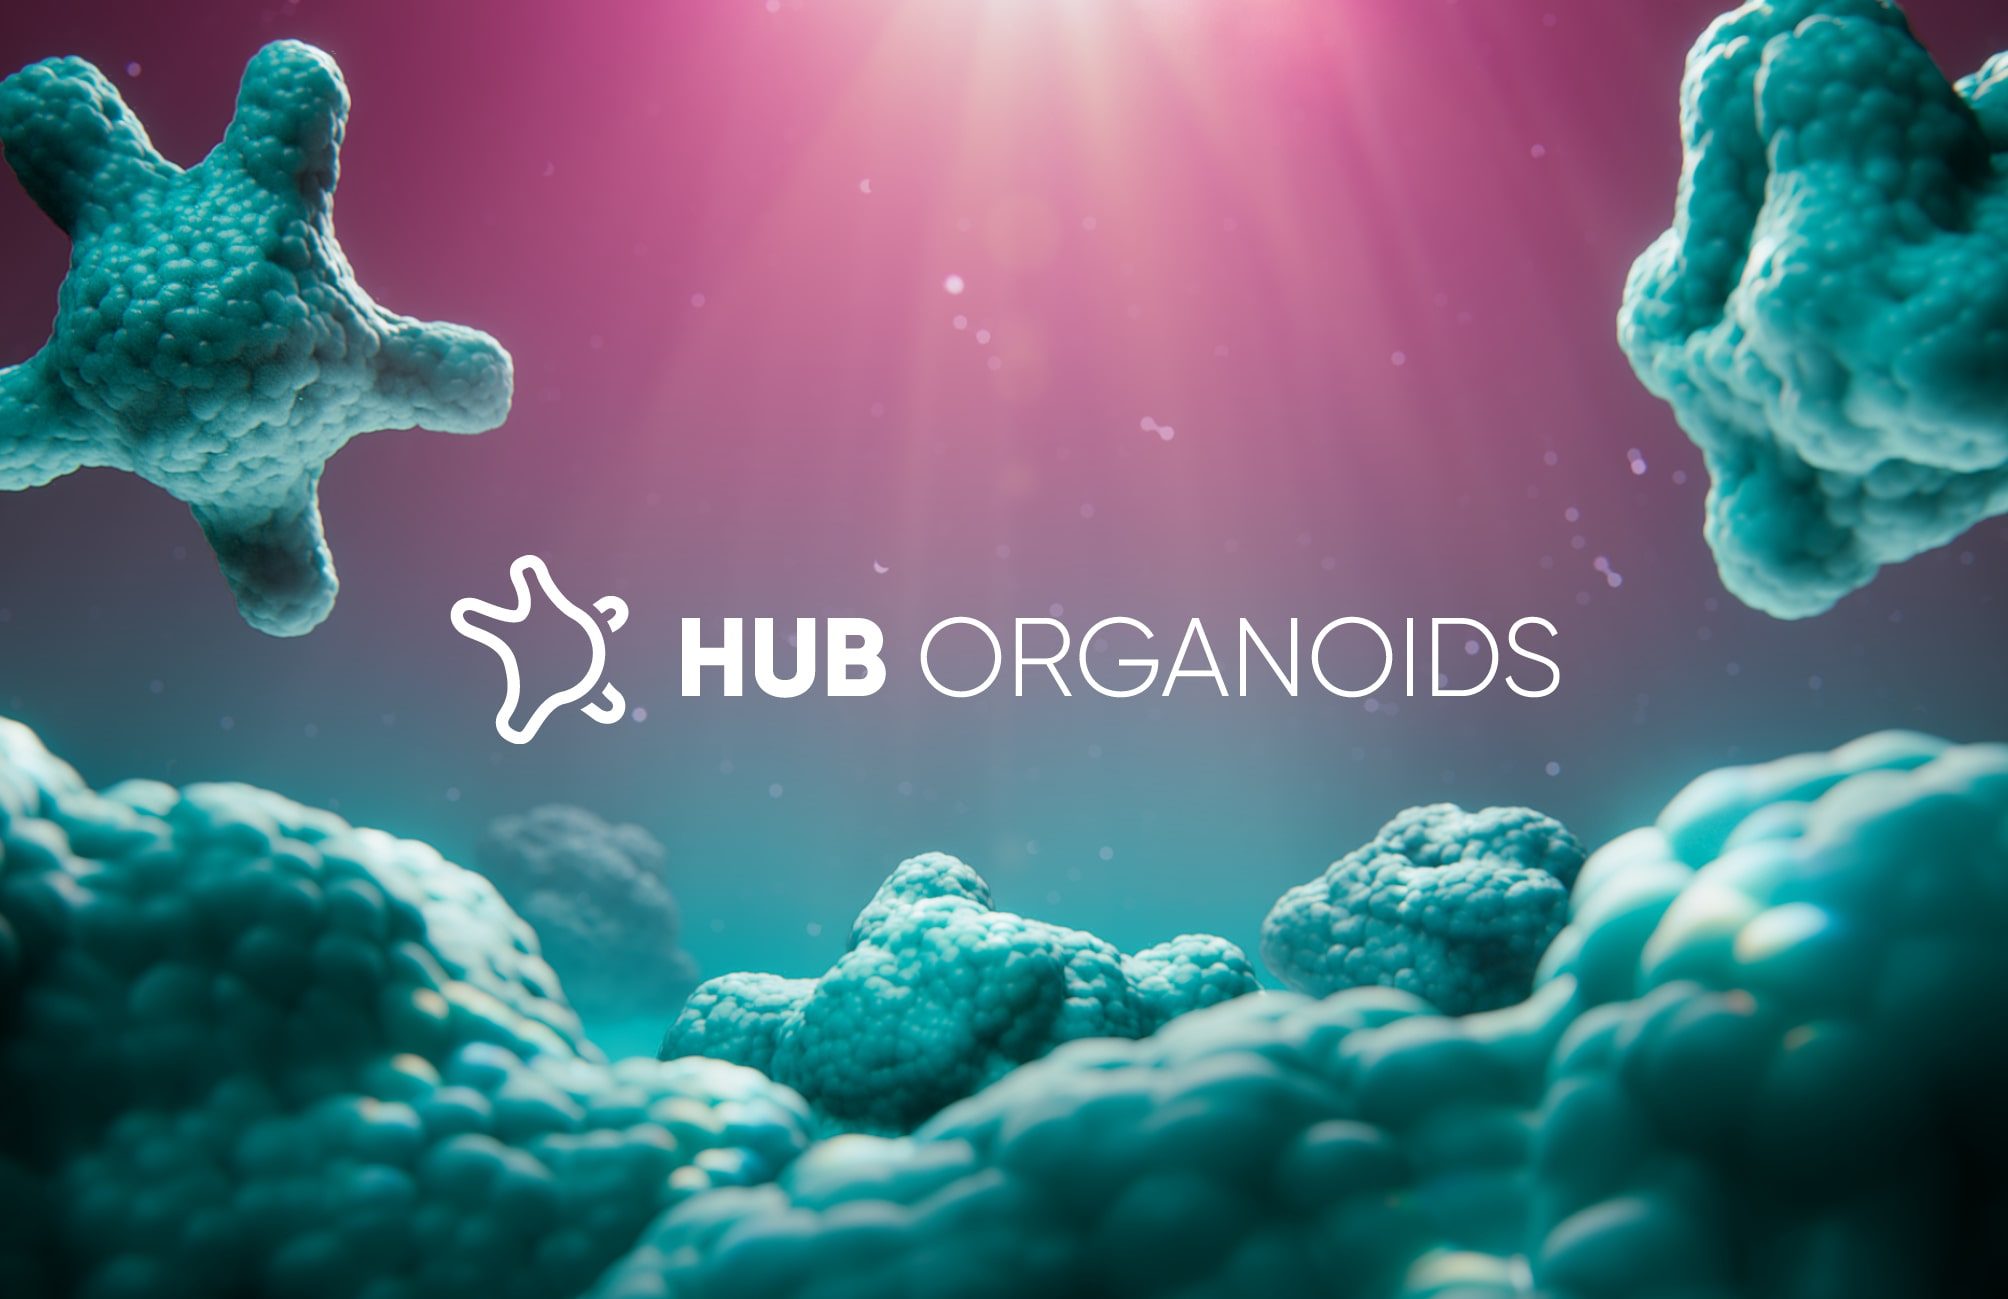 This image shows HUB Organoids' logo and icon in front of organoid back drop 